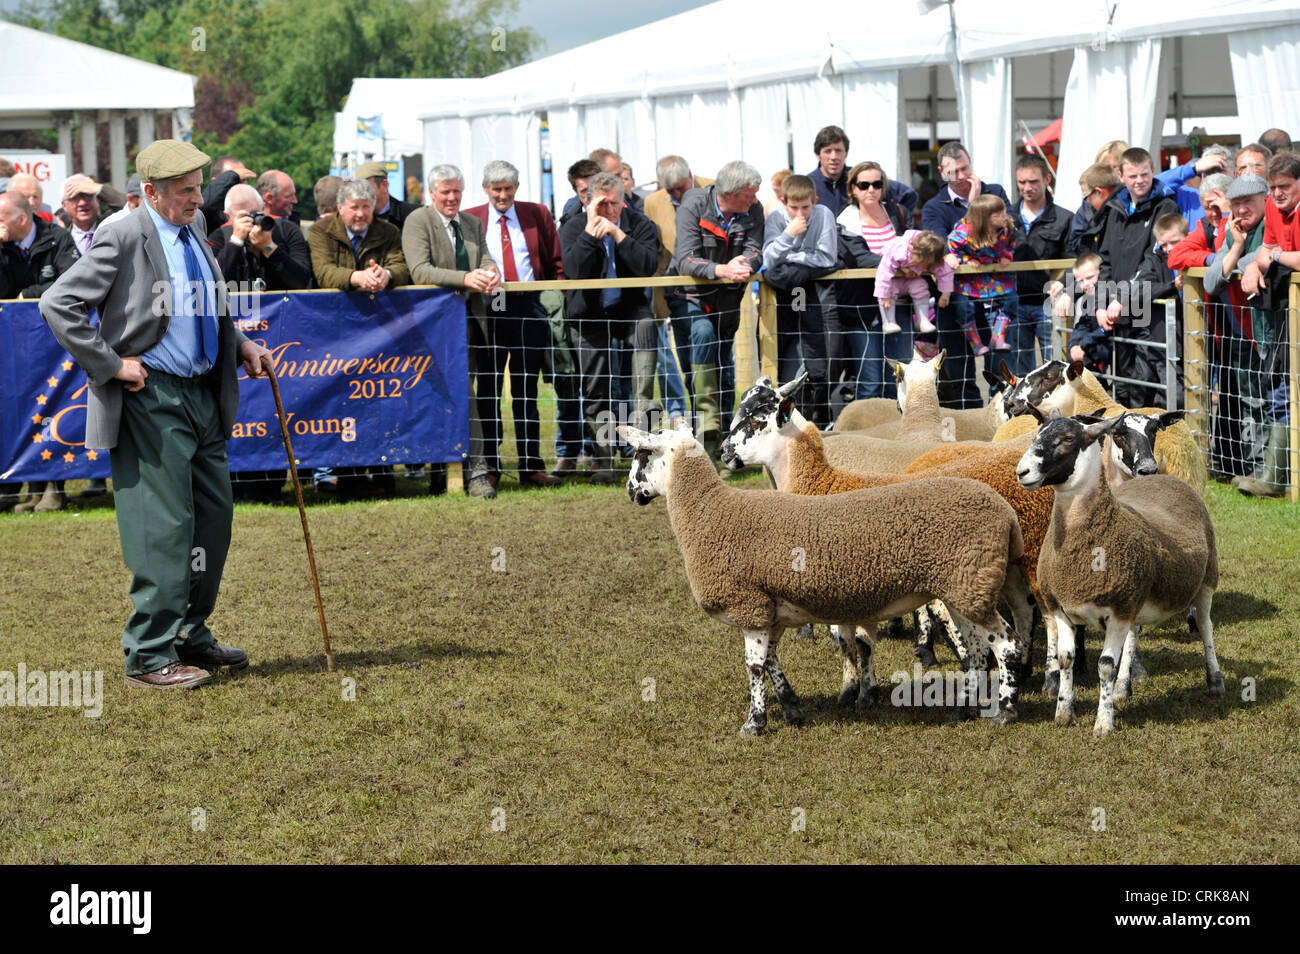 Judging the Scottish Mule classes at the Royal Highland show with a crowd of onlookers. Stock Photo